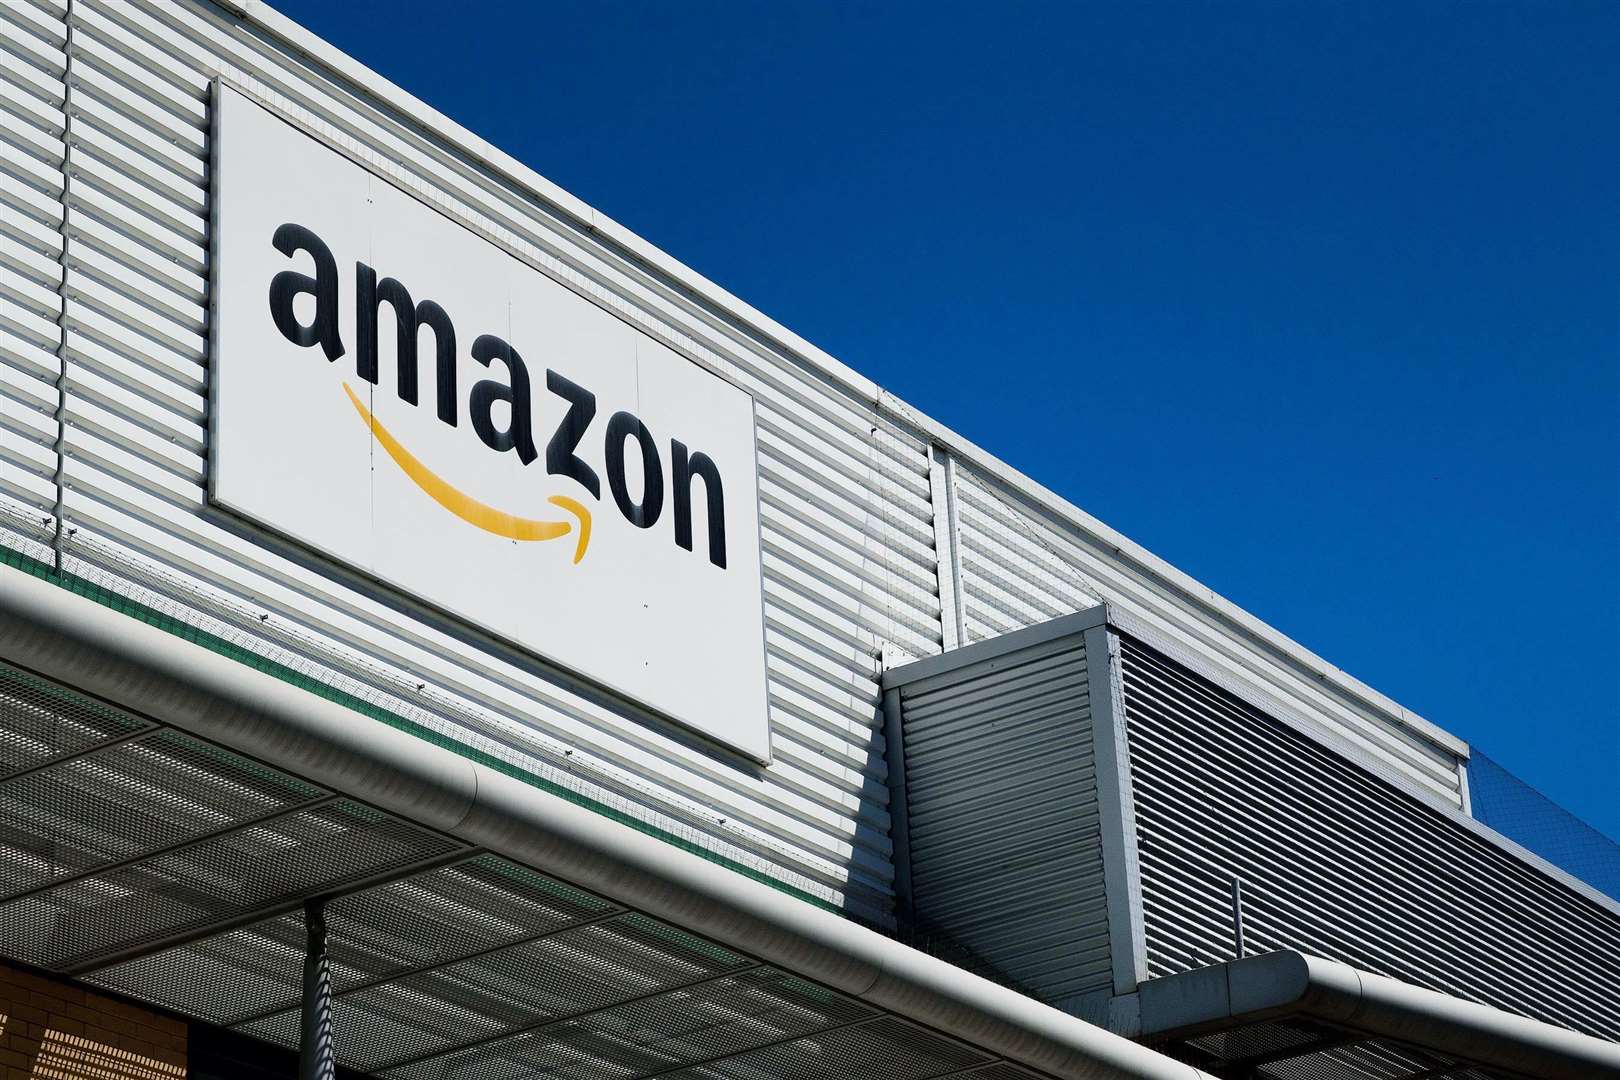 The company hopes to hire hundreds of people in Kent to support the festive rush. Pic: Amazon